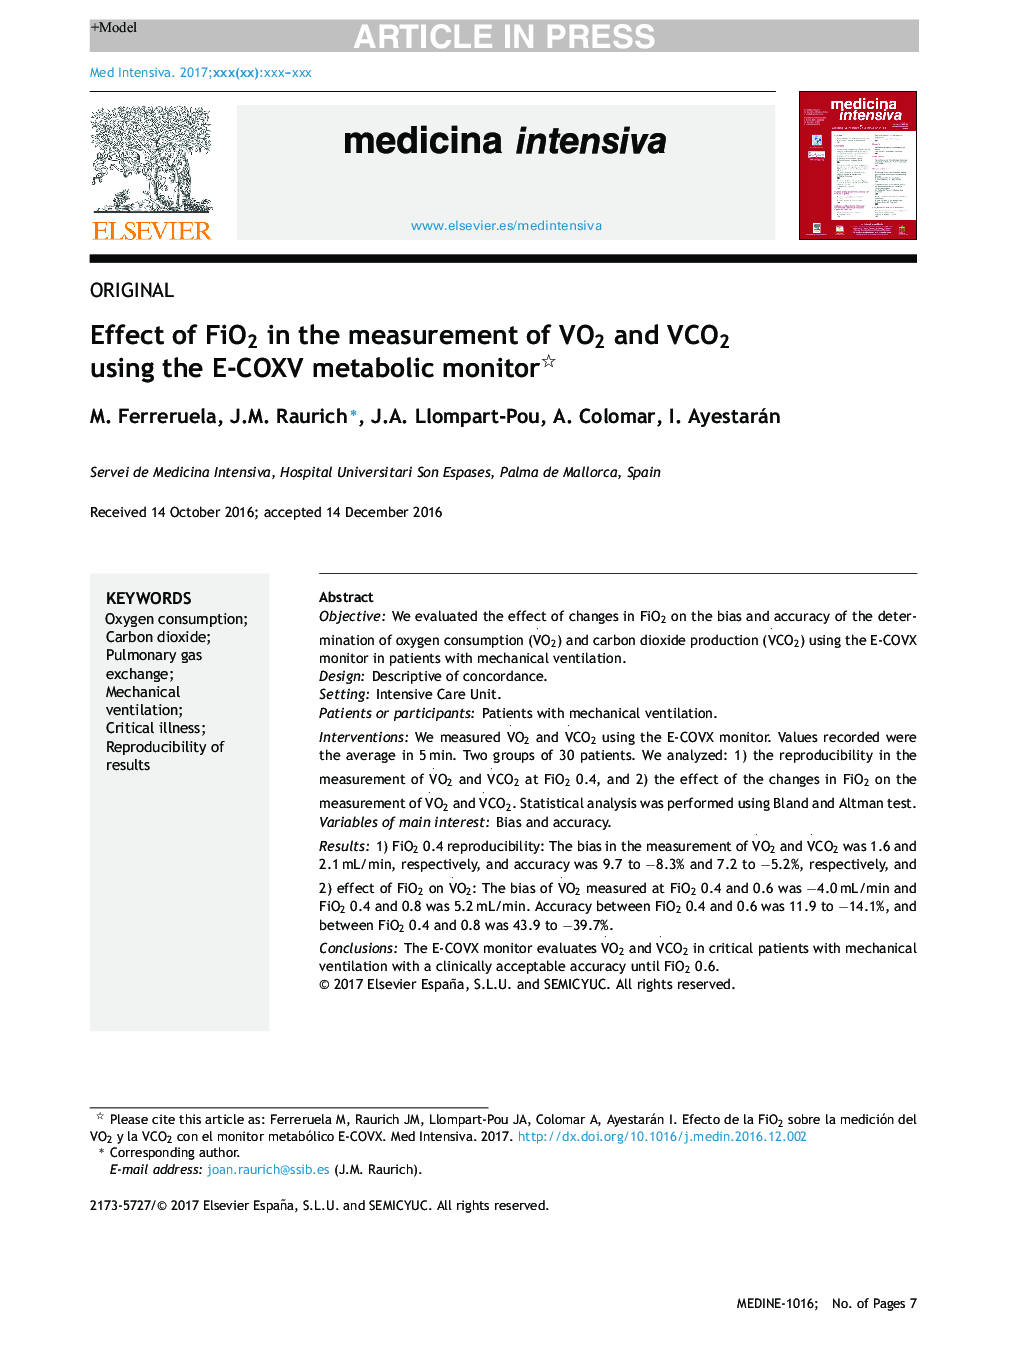 Effect of FiO2 in the measurement of VO2 and VCO2 using the E-COXV metabolic monitor